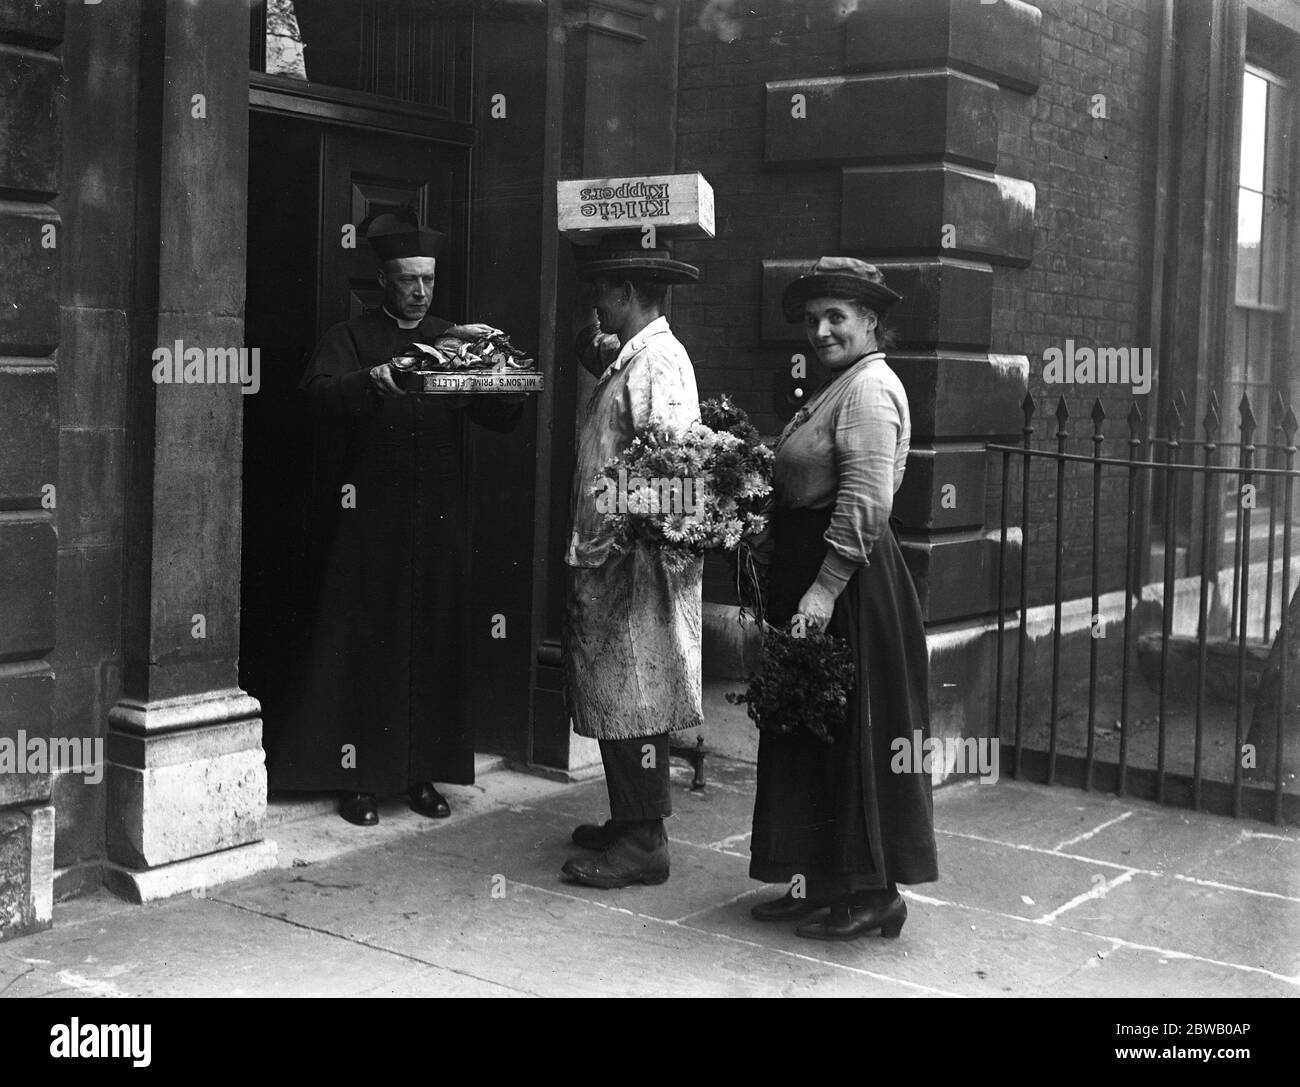 Billingsgate Market ' Fish Harvest Festival . A market porter calling at St Magnus - the - Martyr Church with a contribution . 16 October 1921 Stock Photo